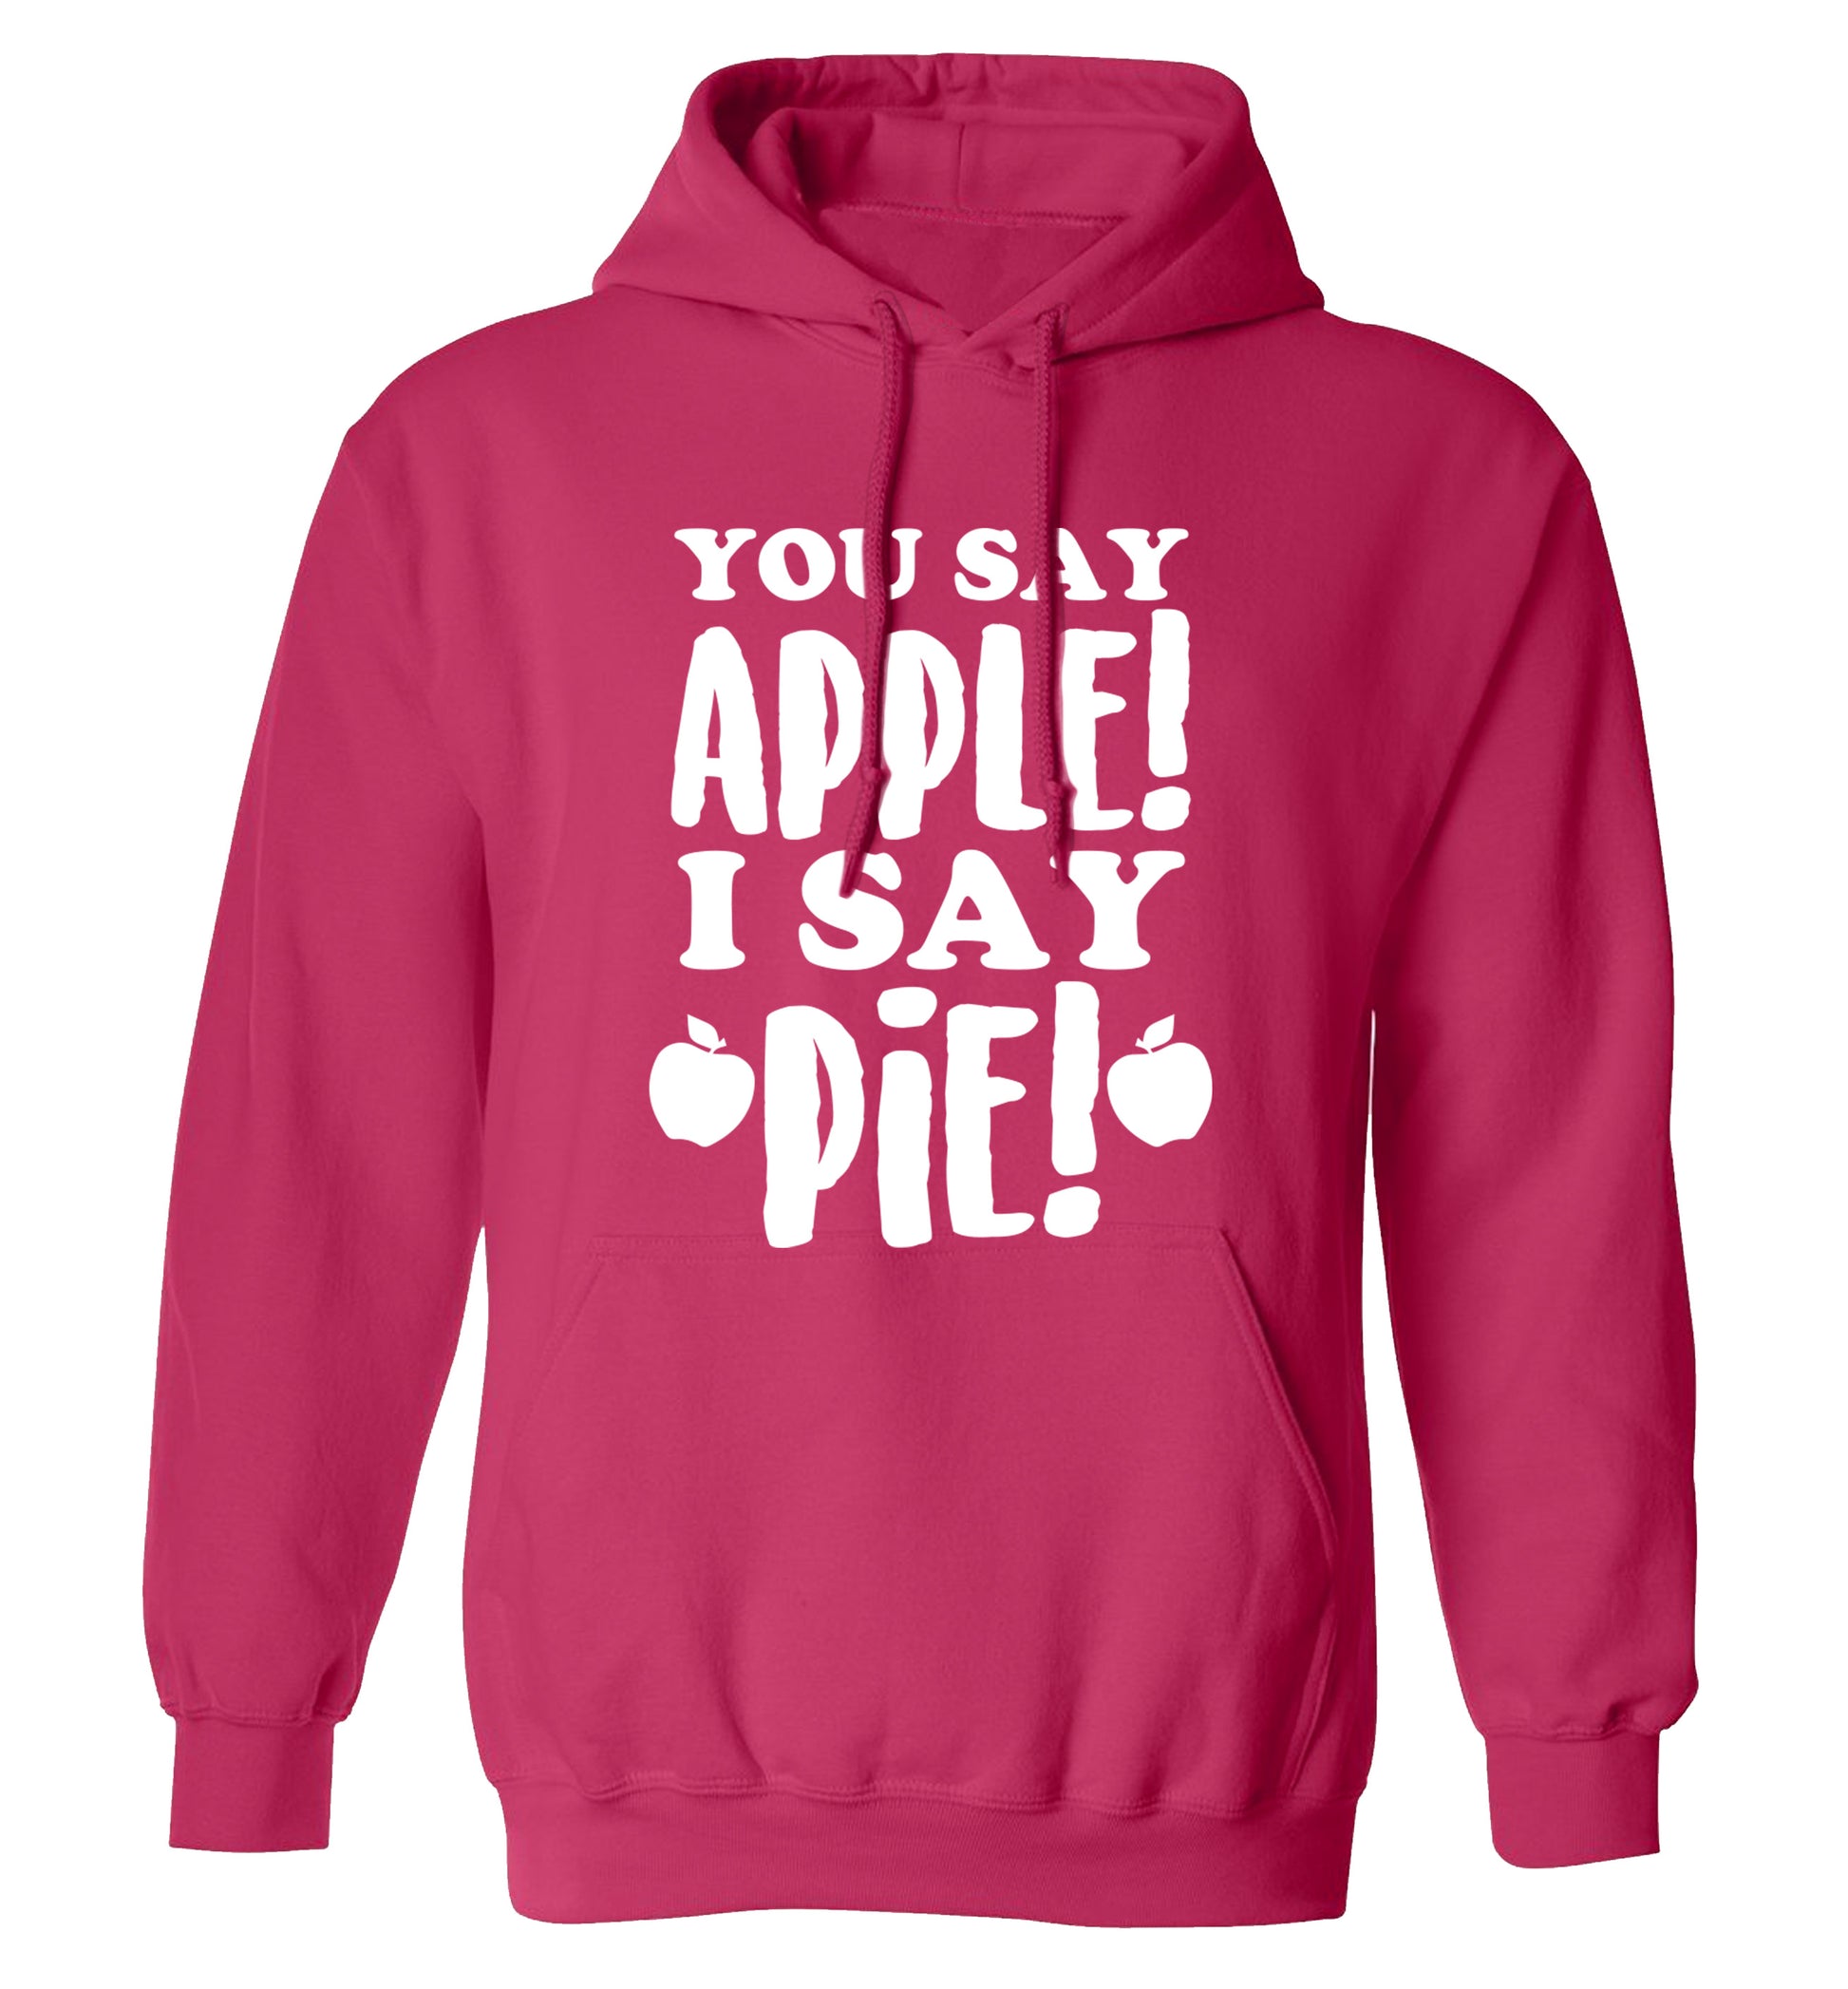 You say apple I say pie! adults unisex pink hoodie 2XL